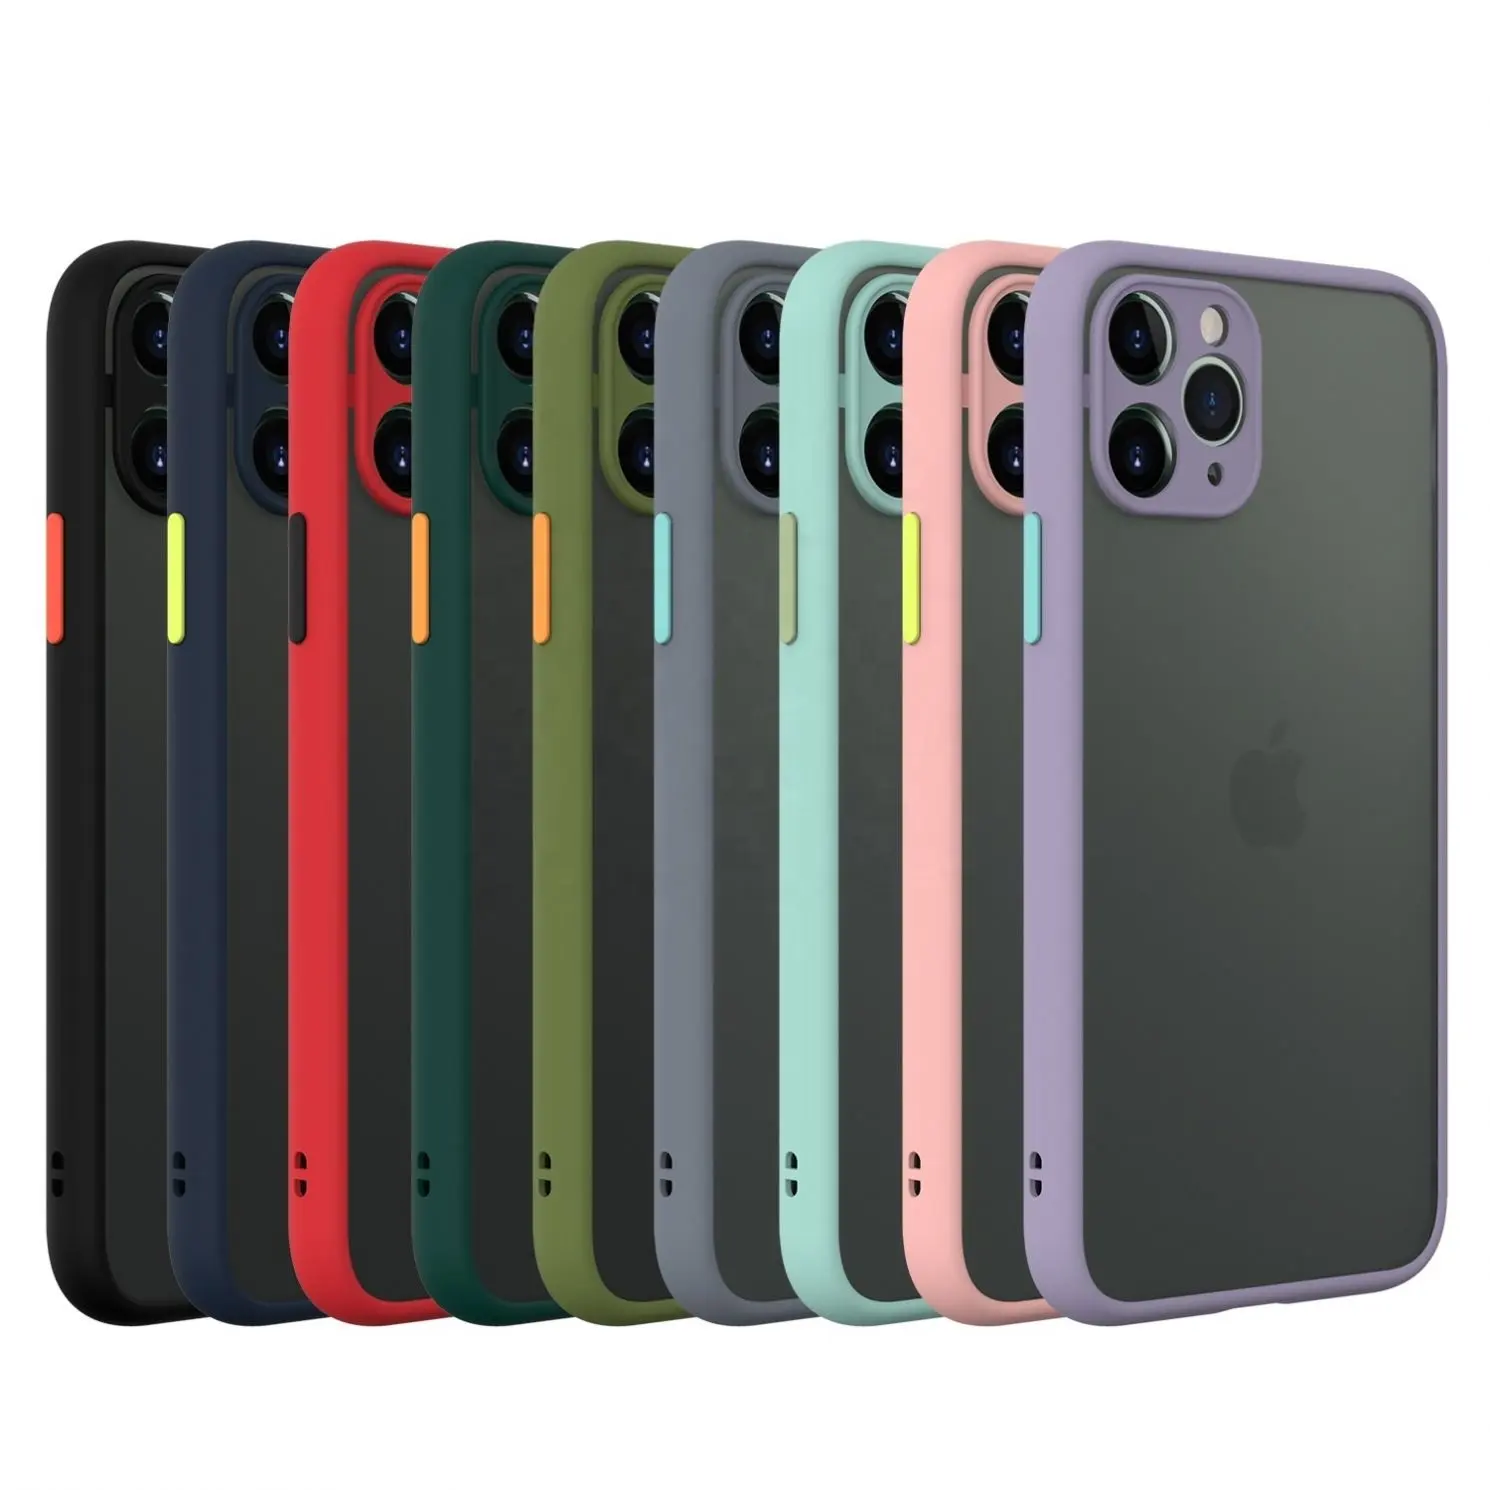 2020 Premium Matte Translucent PC Cell Phone Covers Case with Contrast Button for Apple iPhone 11 Pro Max XS XR X 9 8 Plus 7 SE